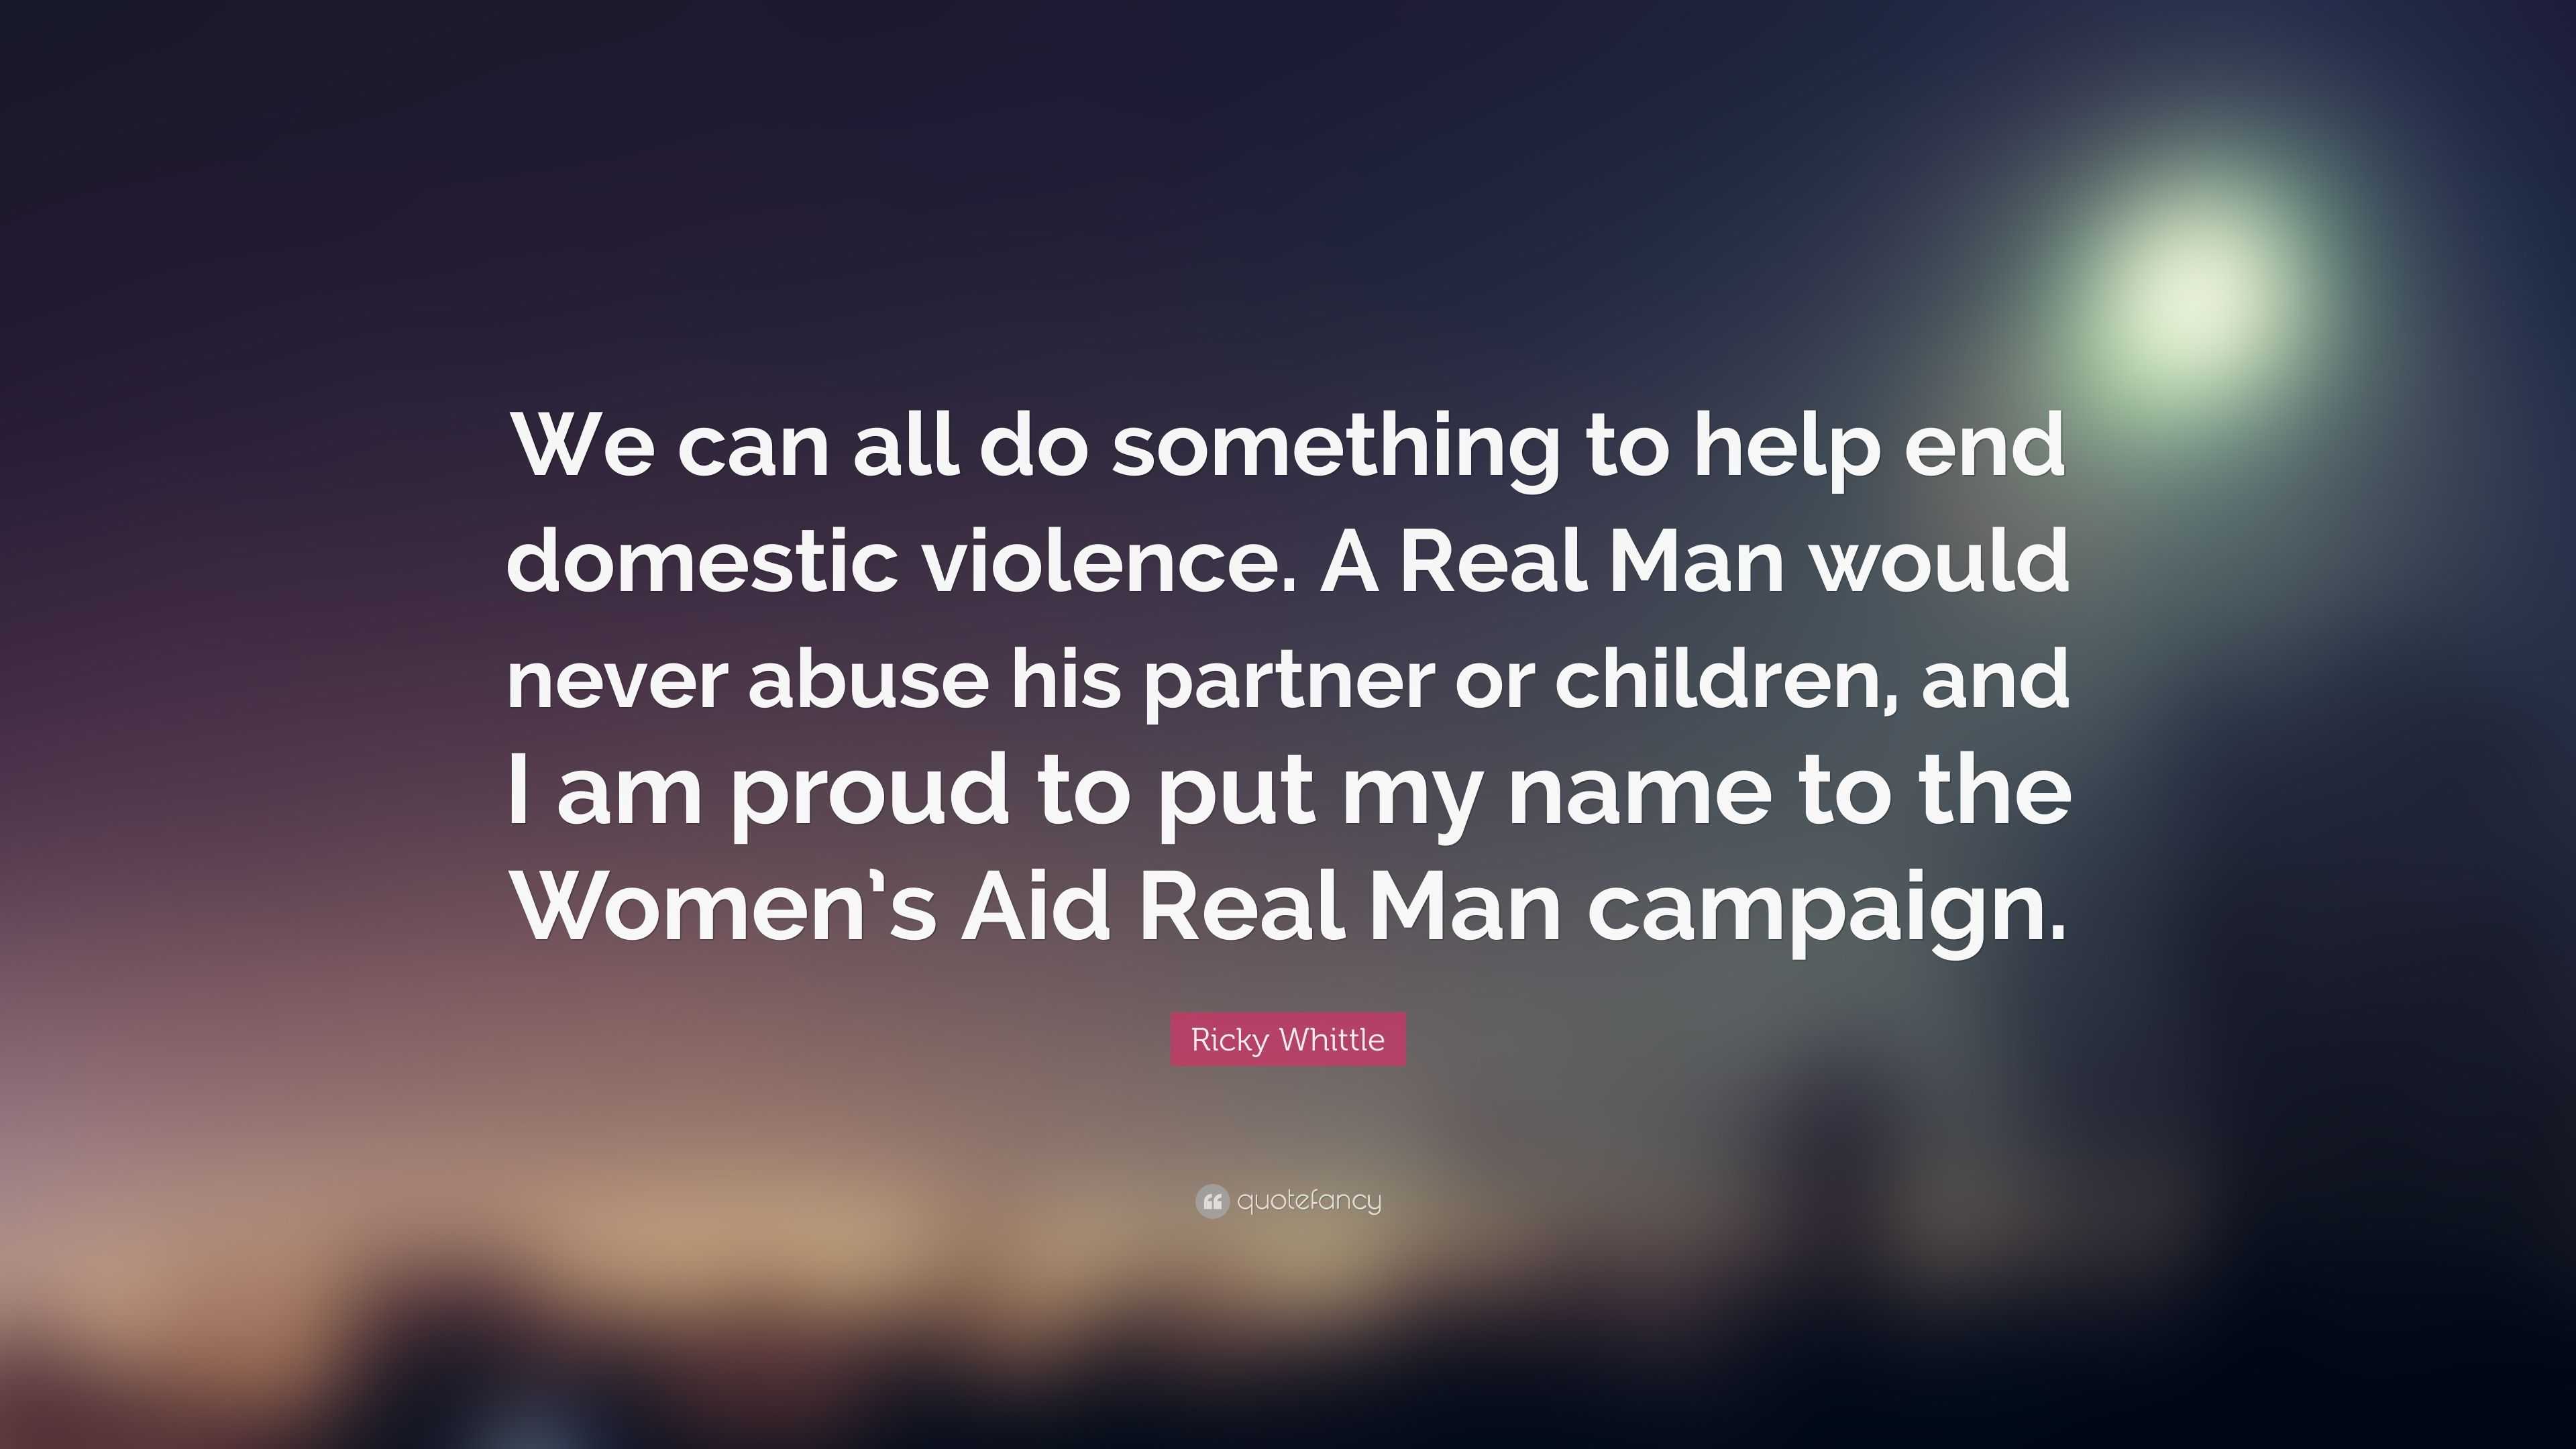 violence against women and children quotes